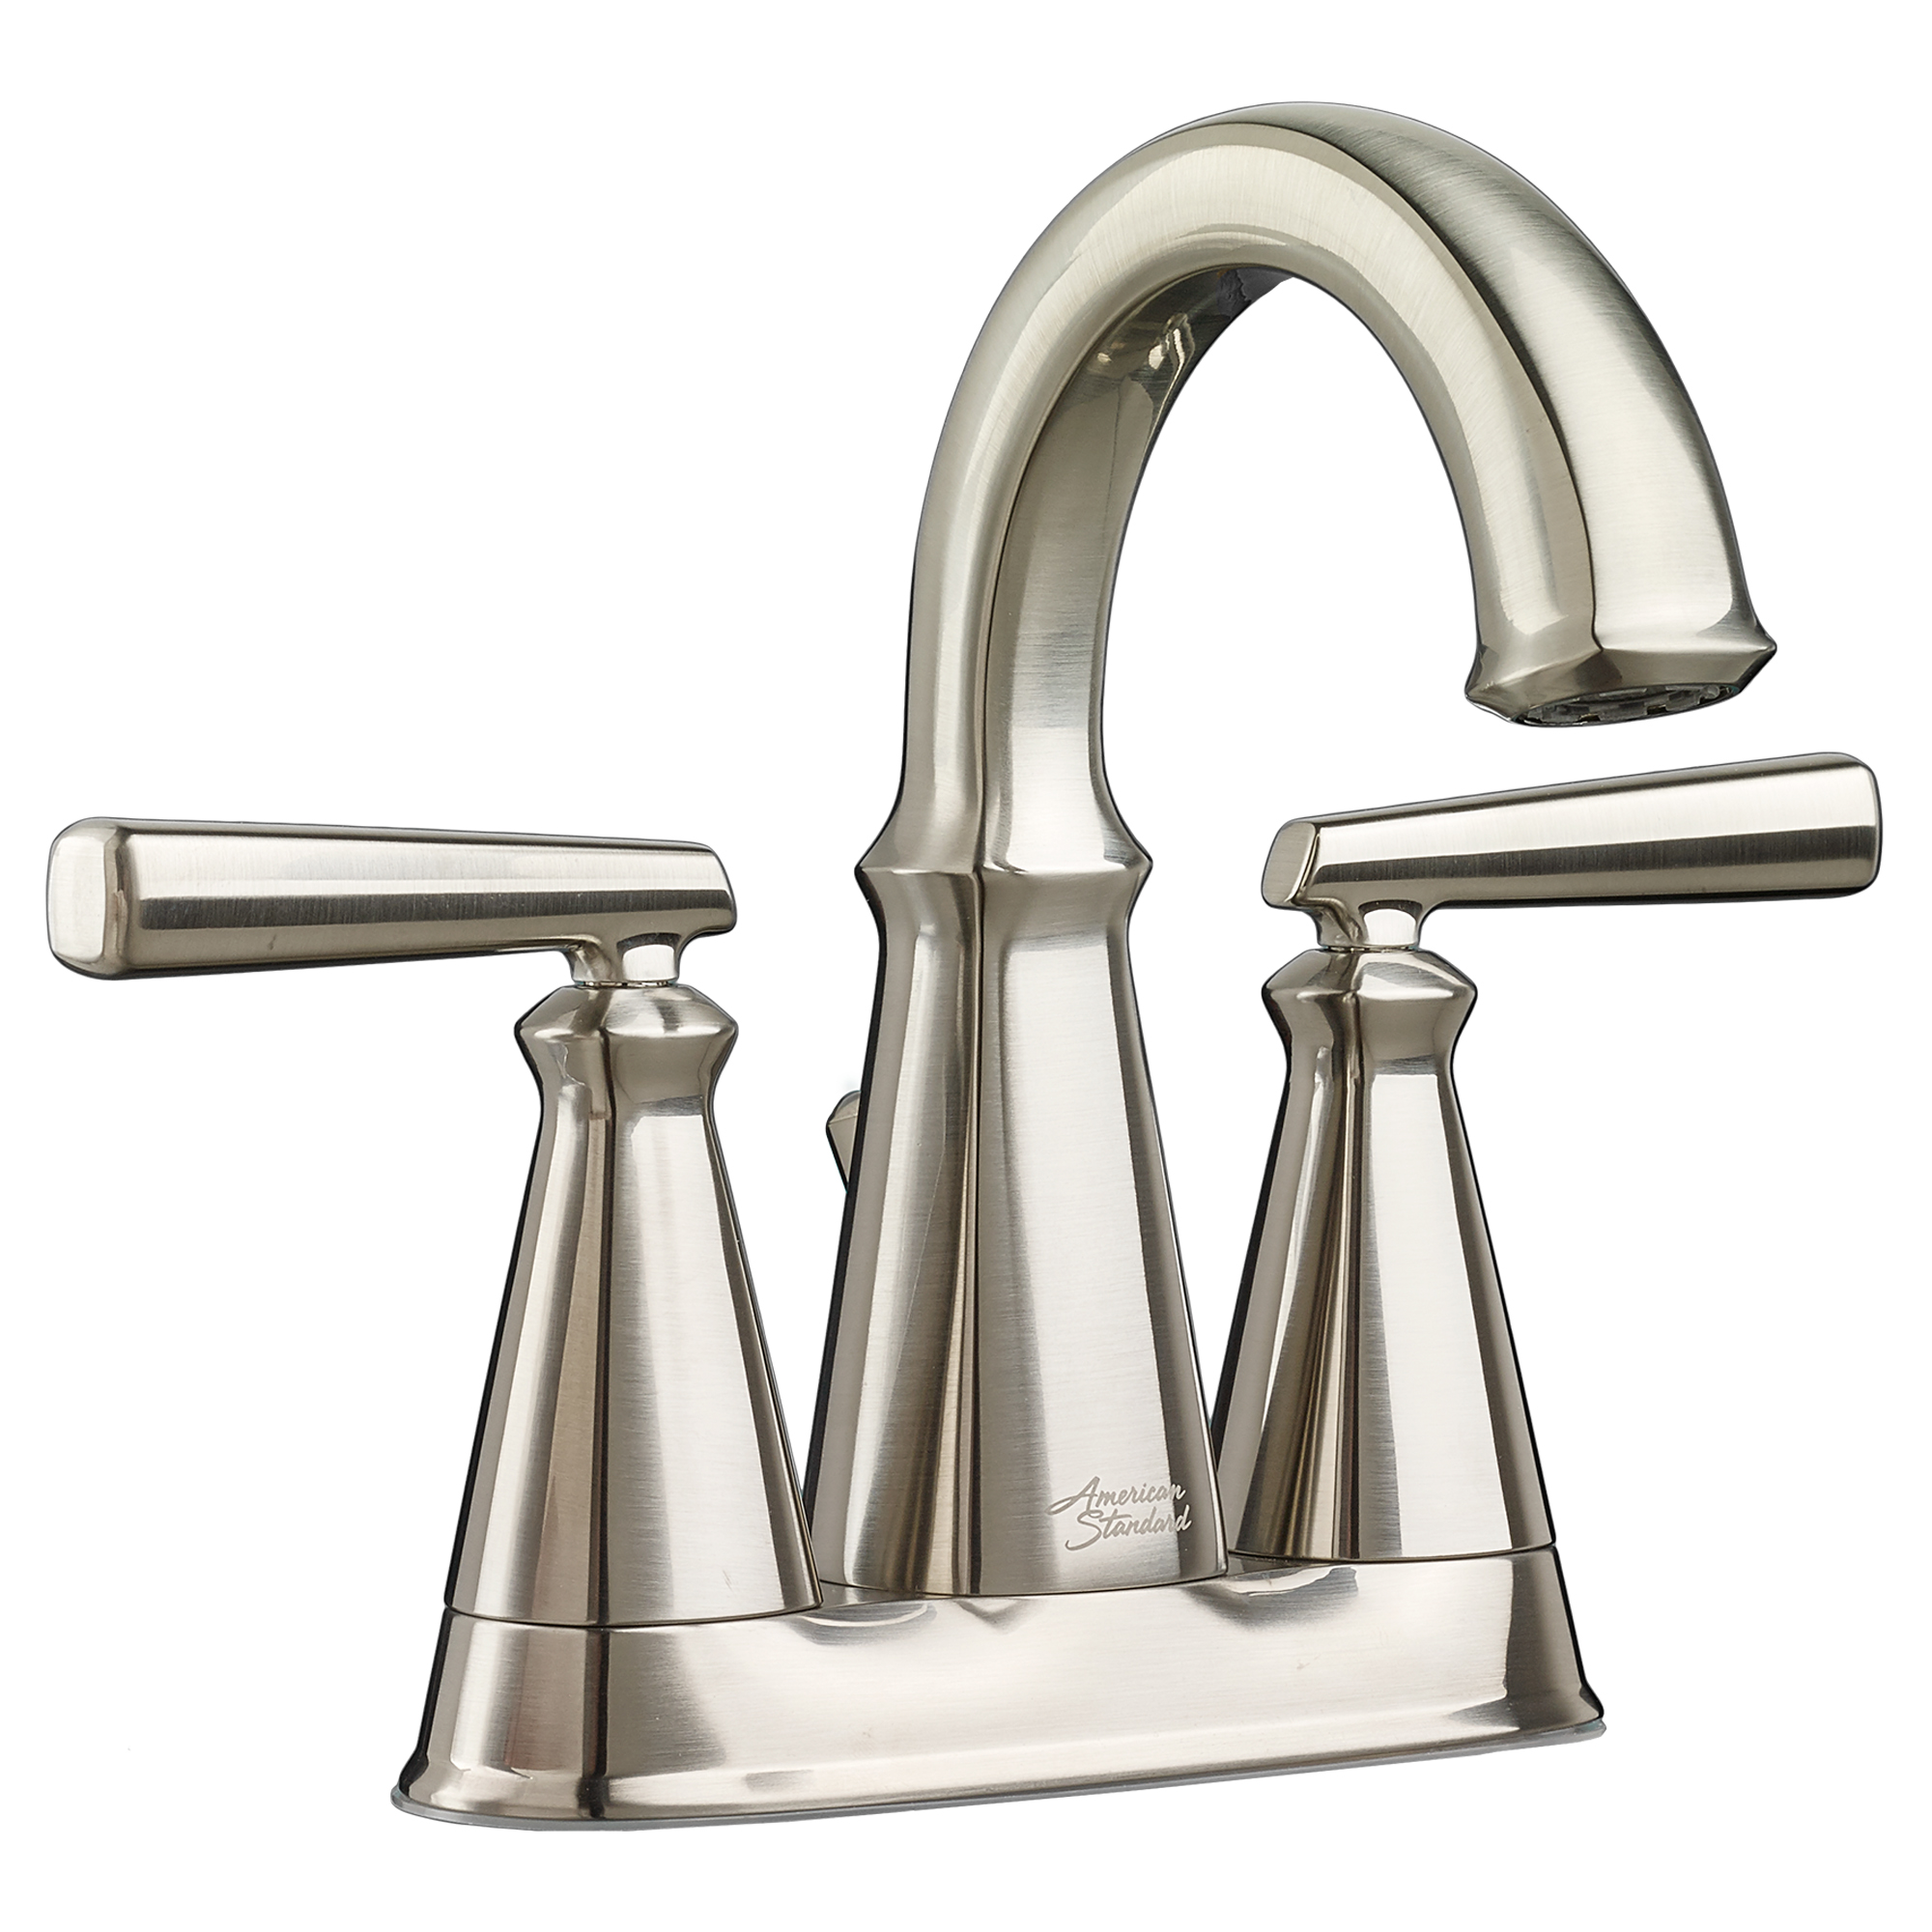 Edgemere Centerset Lav Faucet 2-Handles In Brushed Nickel